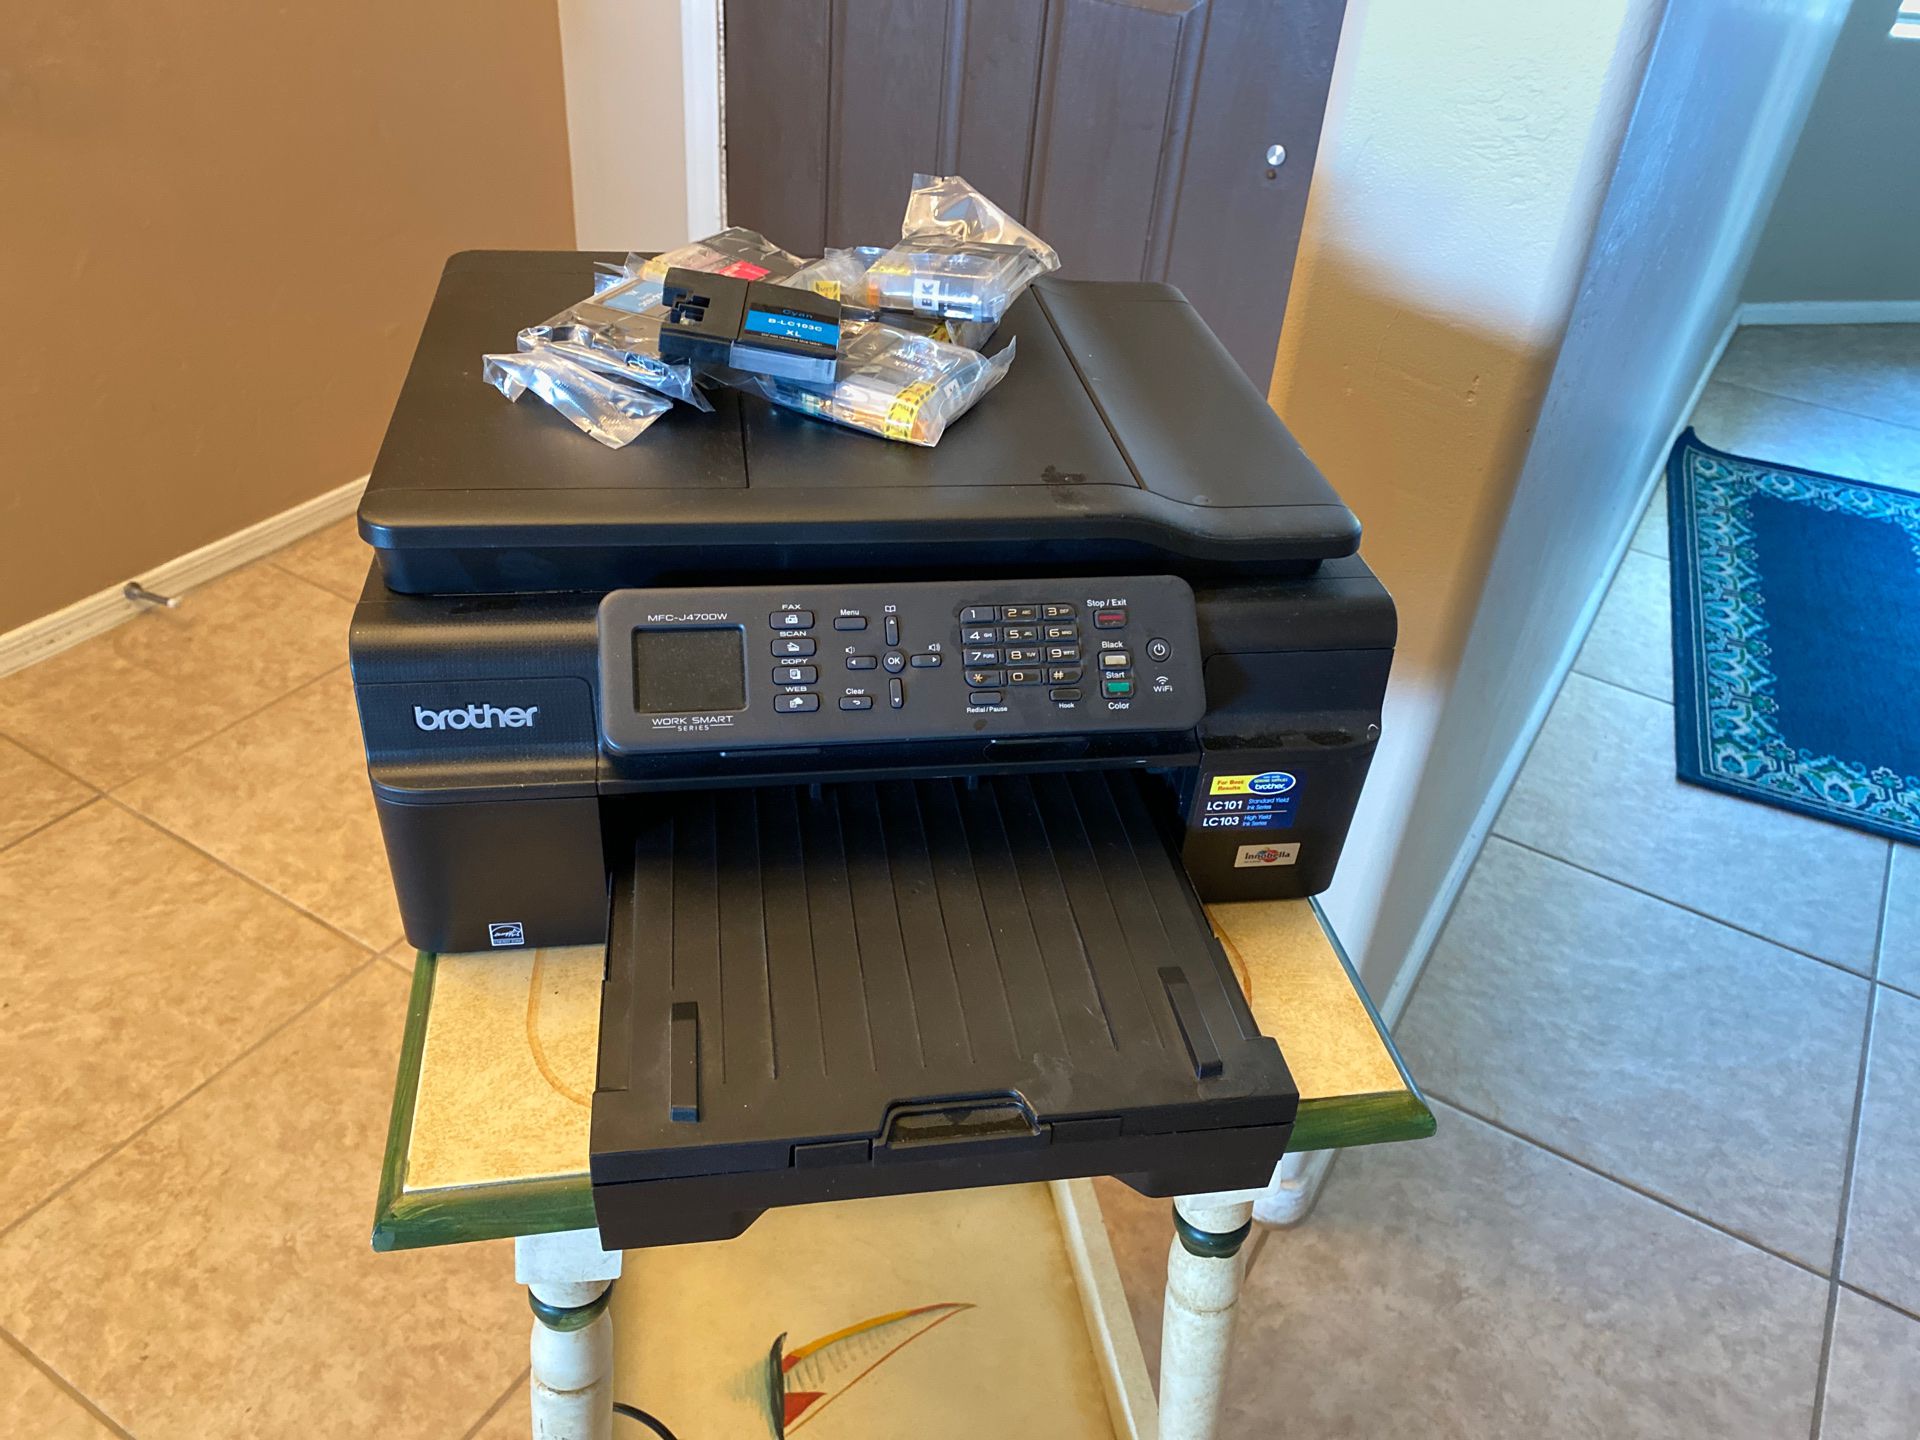 Brother printer with lots of extra ink